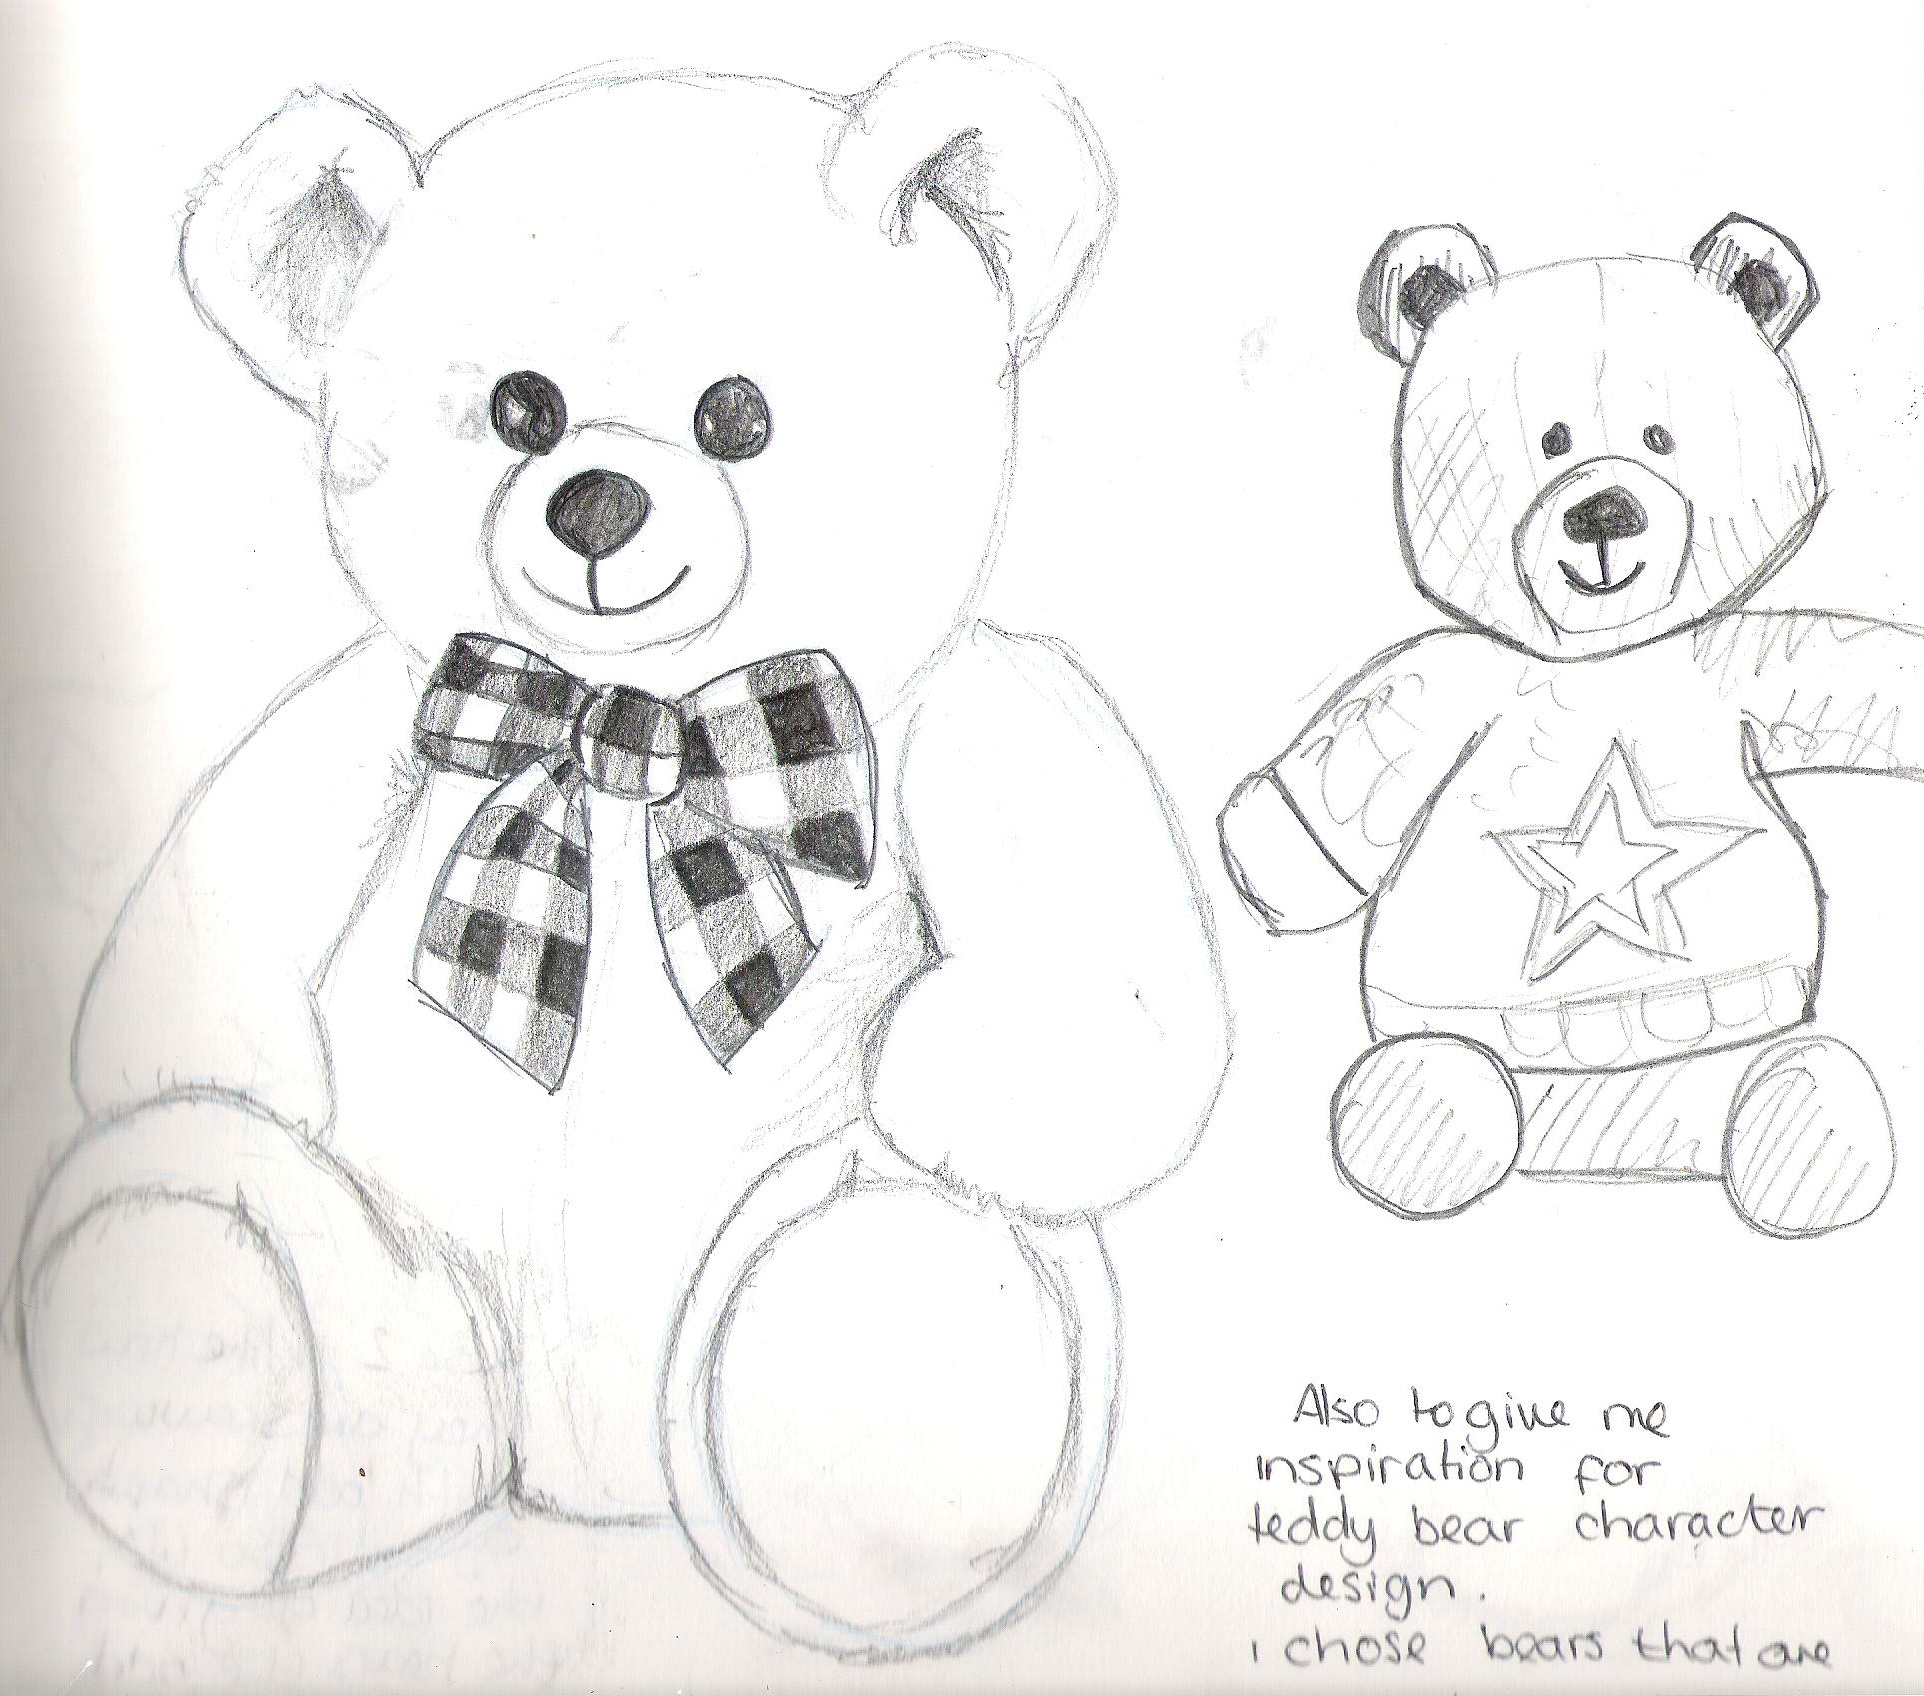 How to draw a bear in a sweater! » Make a Mark Studios